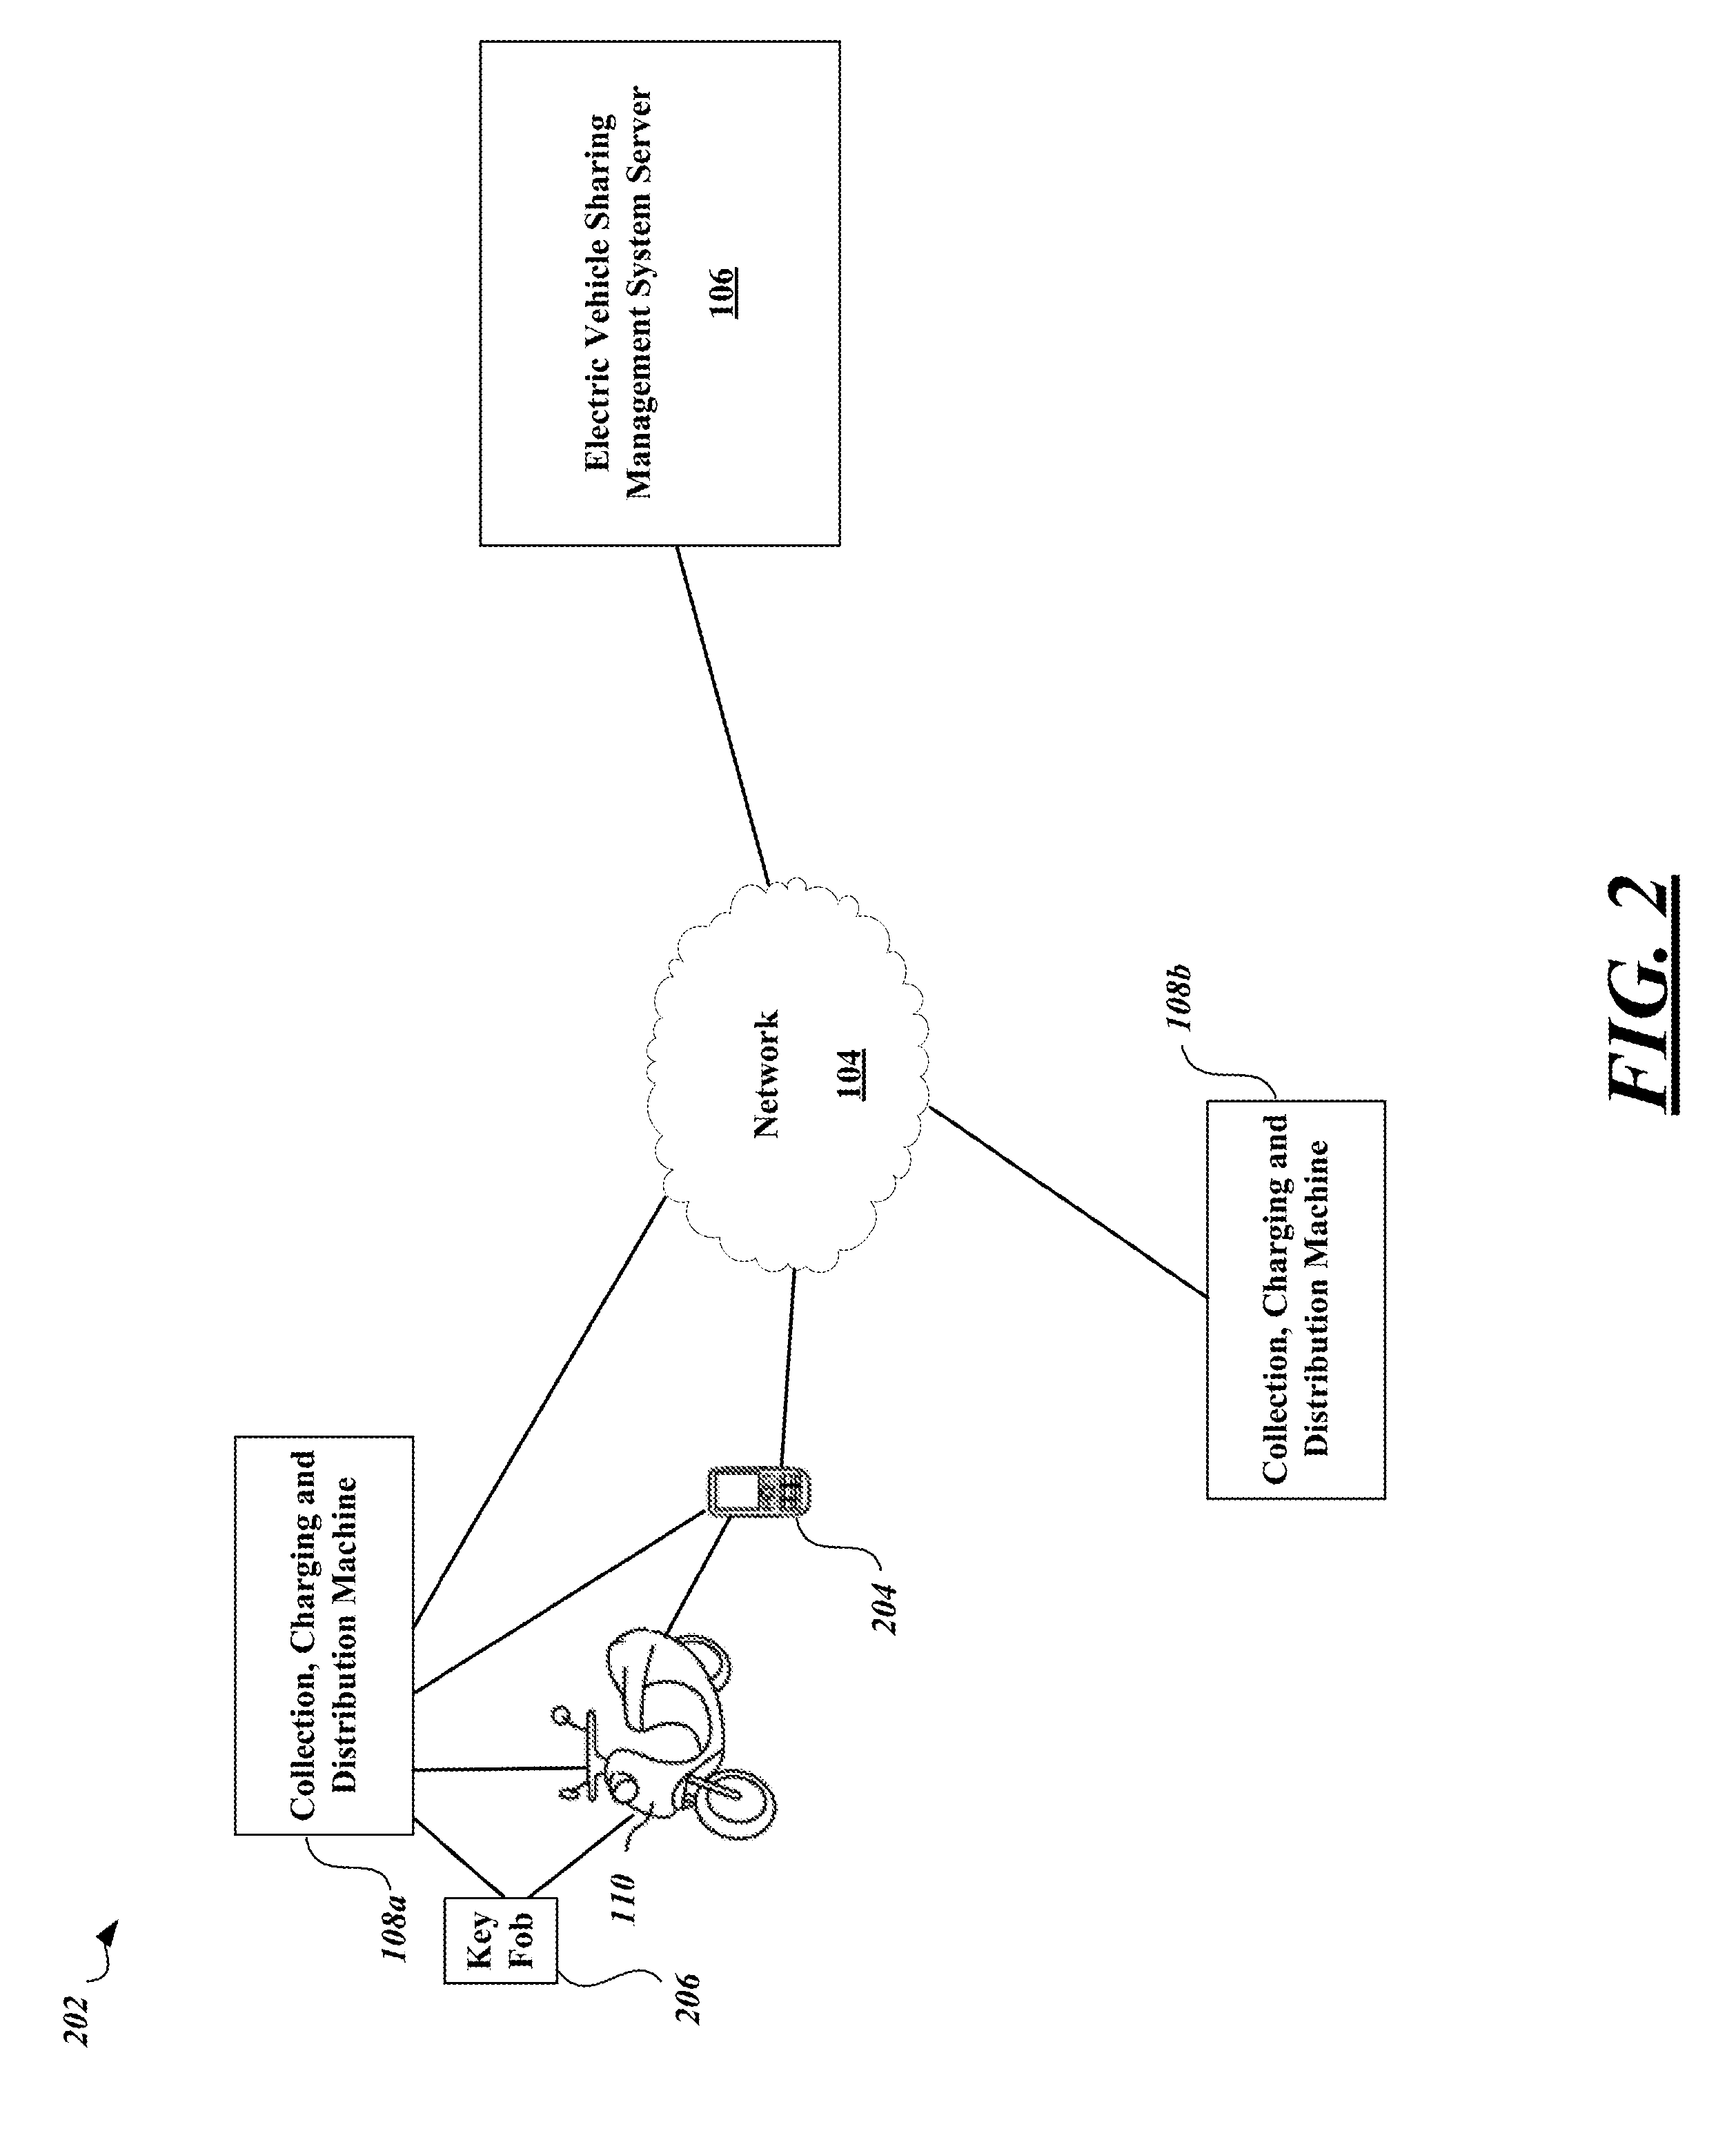 Apparatus, method and article for electric vehicle sharing